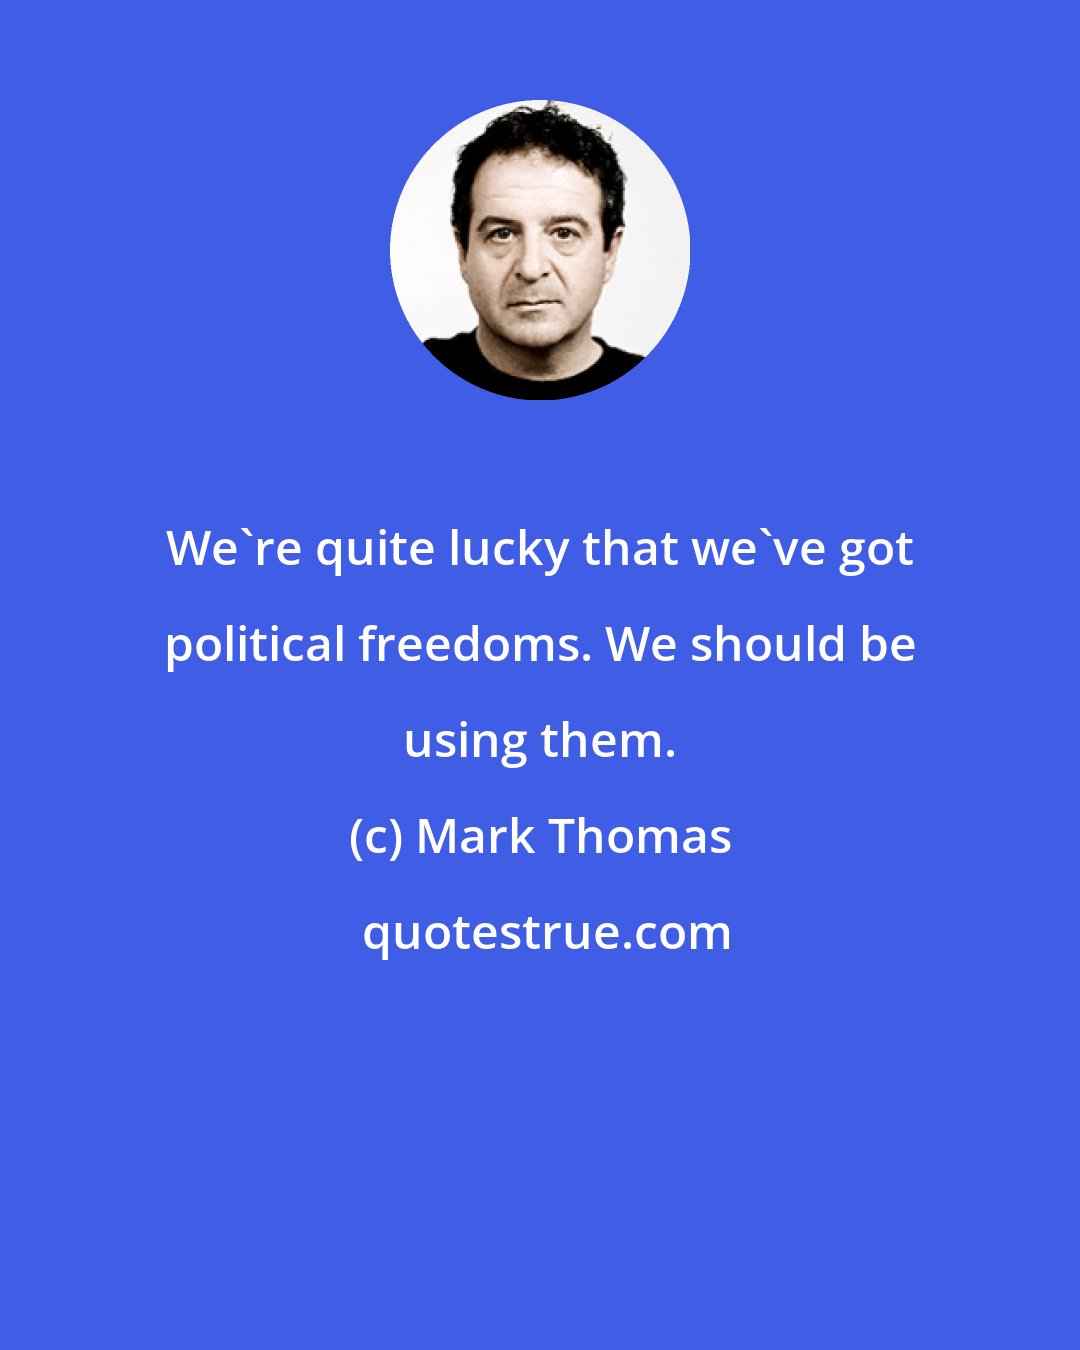 Mark Thomas: We're quite lucky that we've got political freedoms. We should be using them.